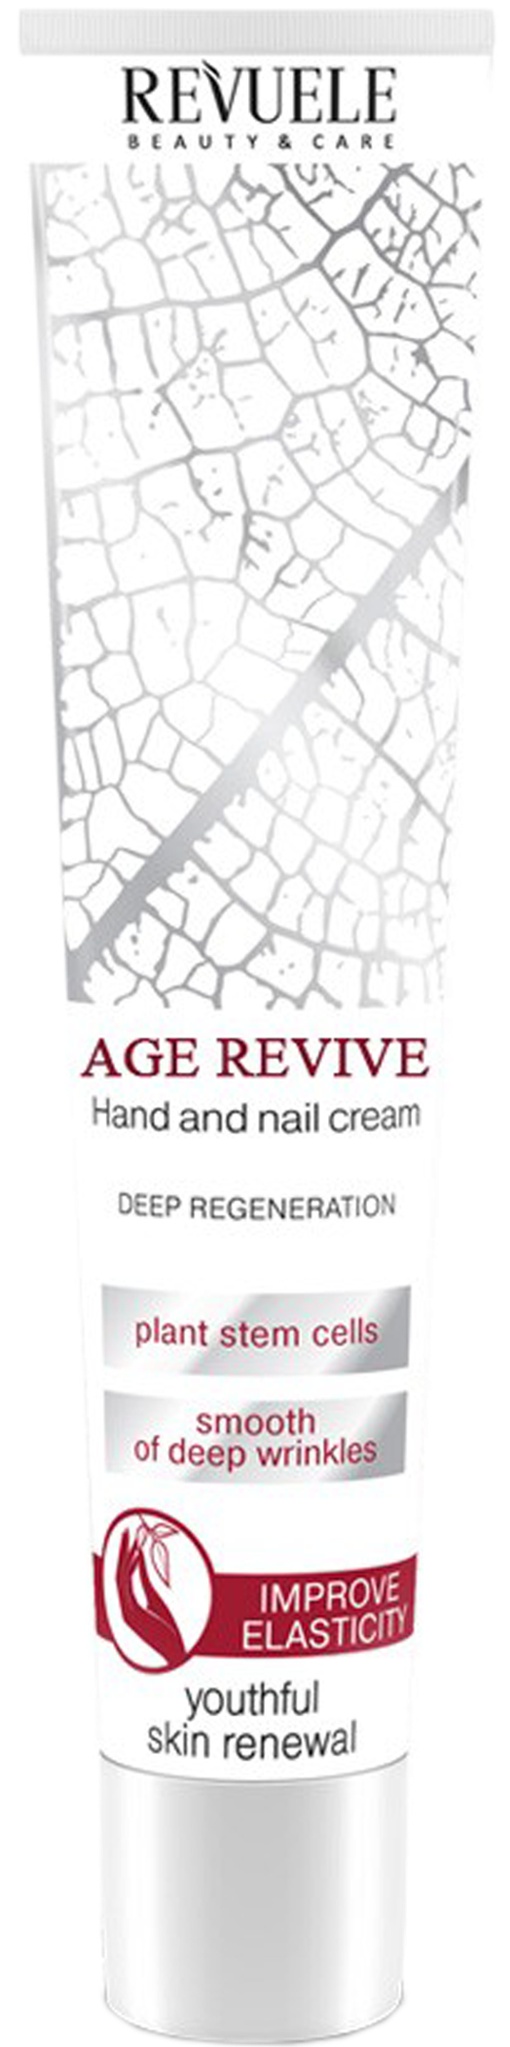 Revuele Age Revive Hand And Nail Cream